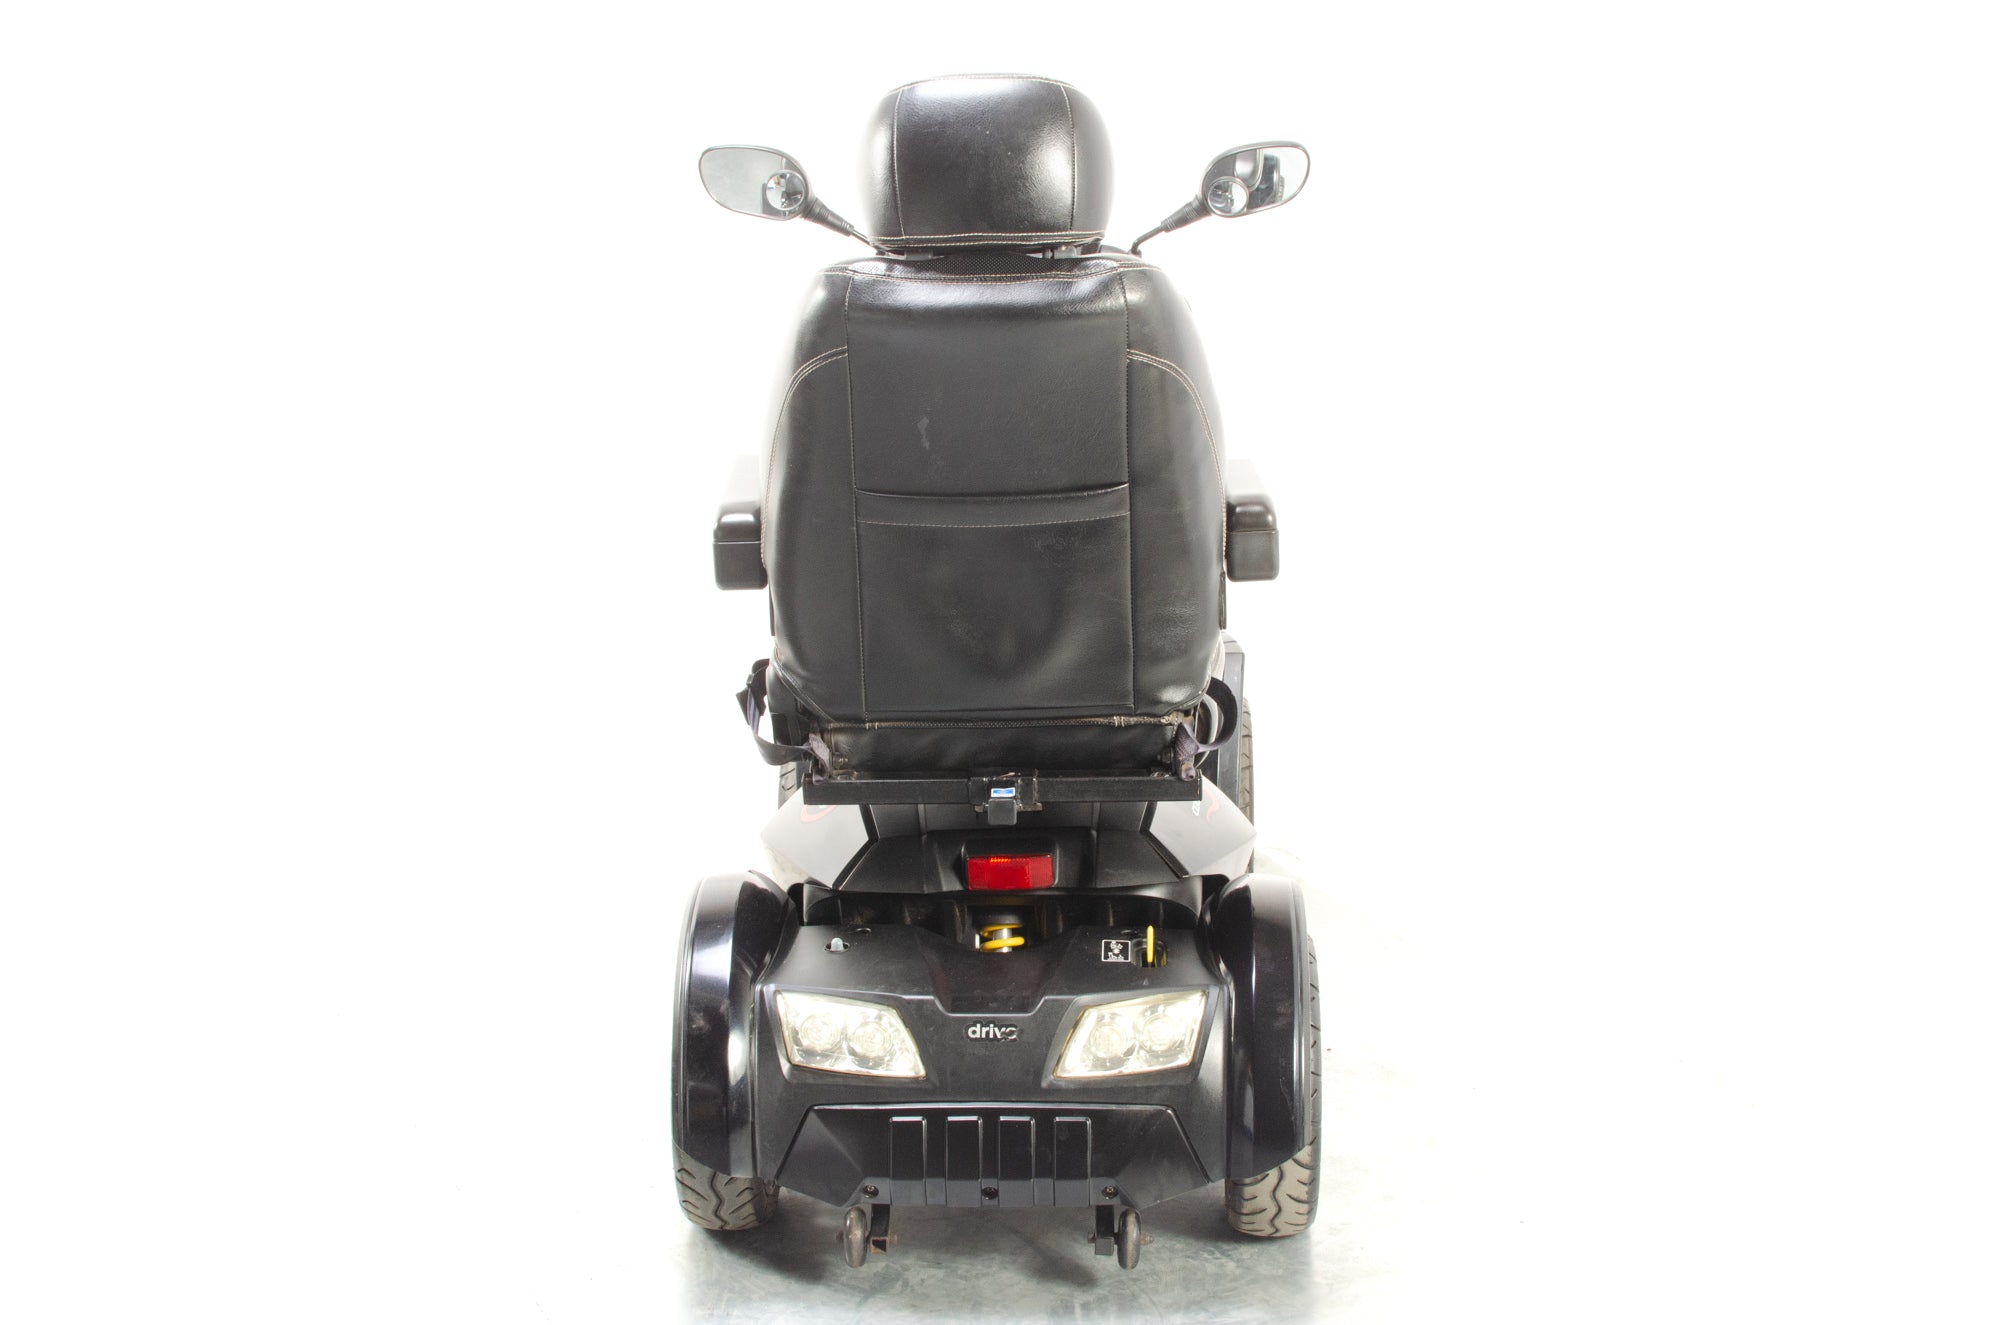 Drive Cobra Large All-Terrain Mobility Scooter 8mph Used Black